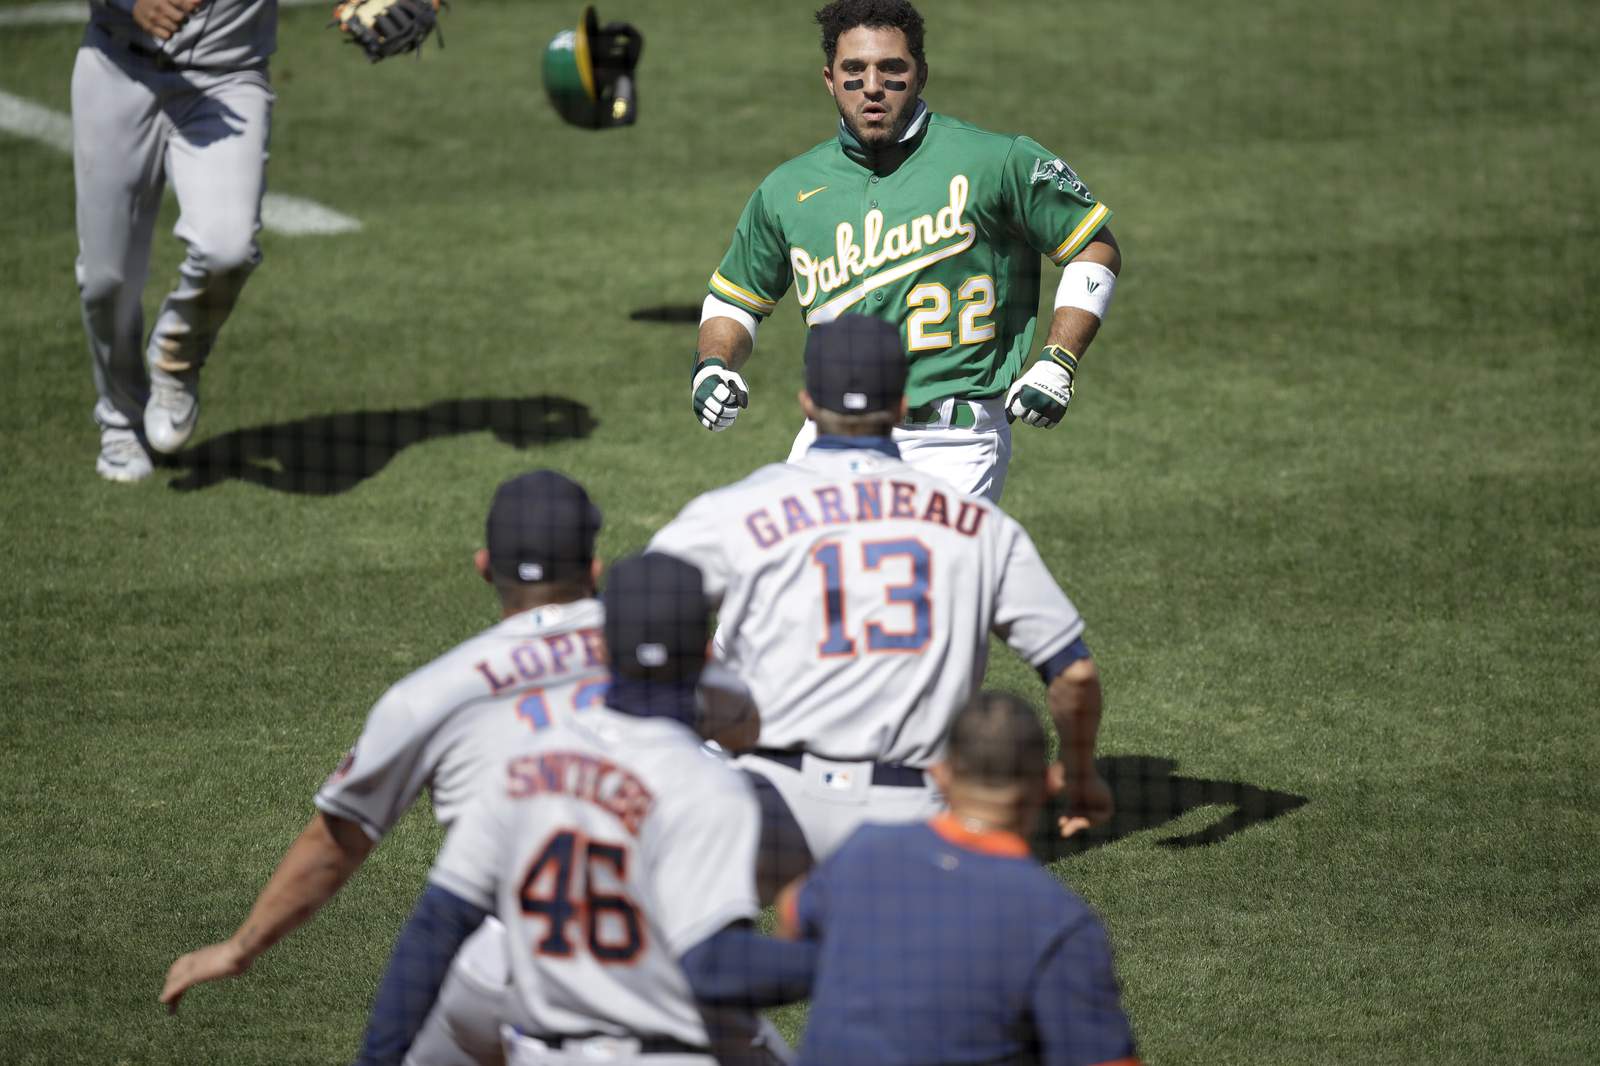 Laureano says Astros coach insulted mother, sparking fracas